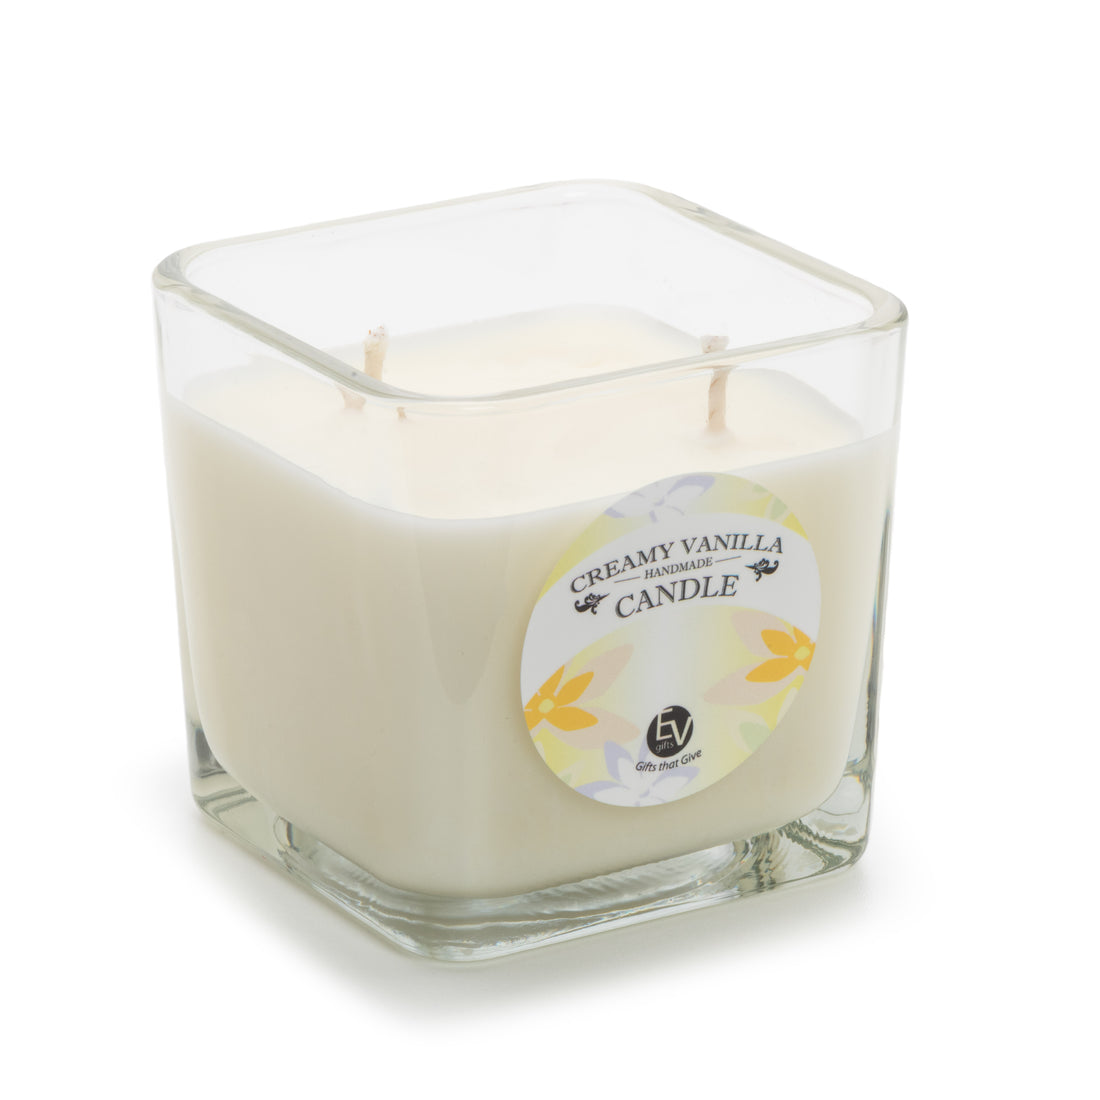 Creamy Vanilla Soy Candle, Double Wick